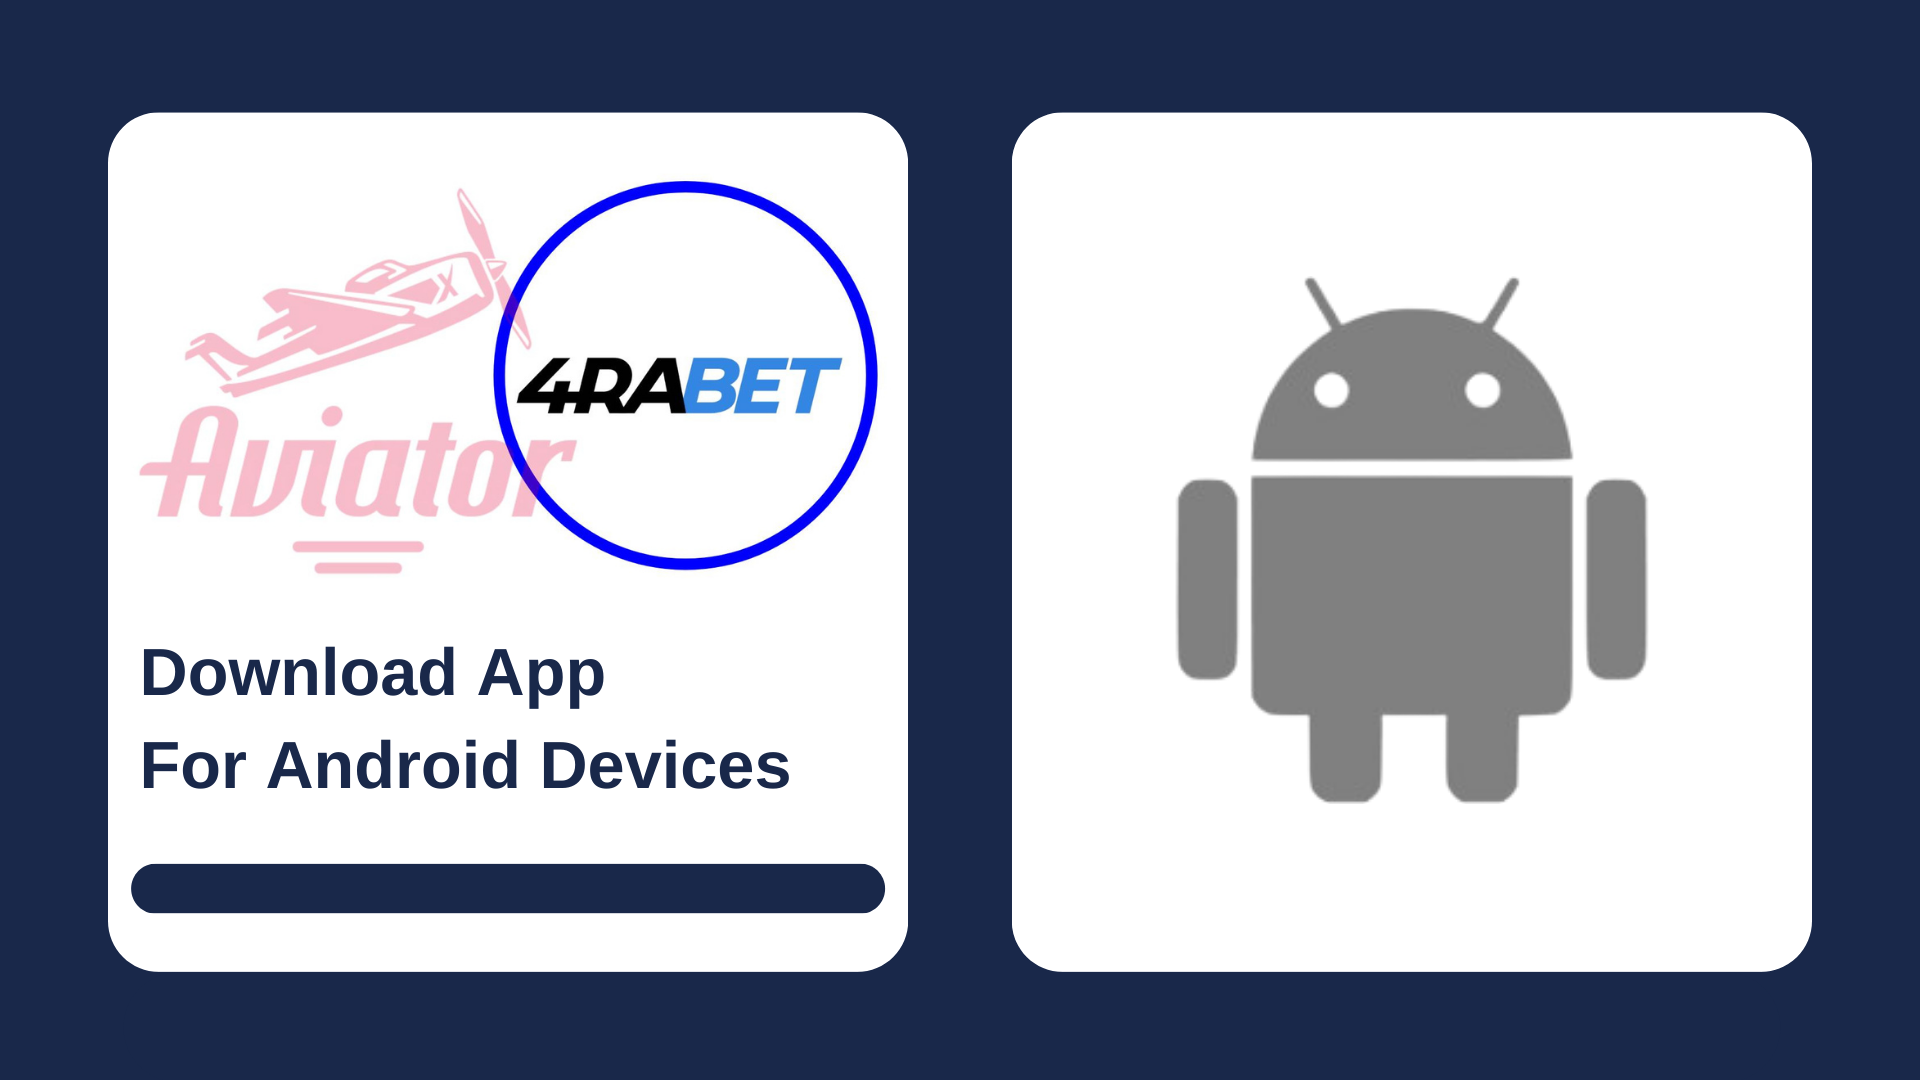 First picture showing Aviator and 4rabet logos with text, and second - Android icon